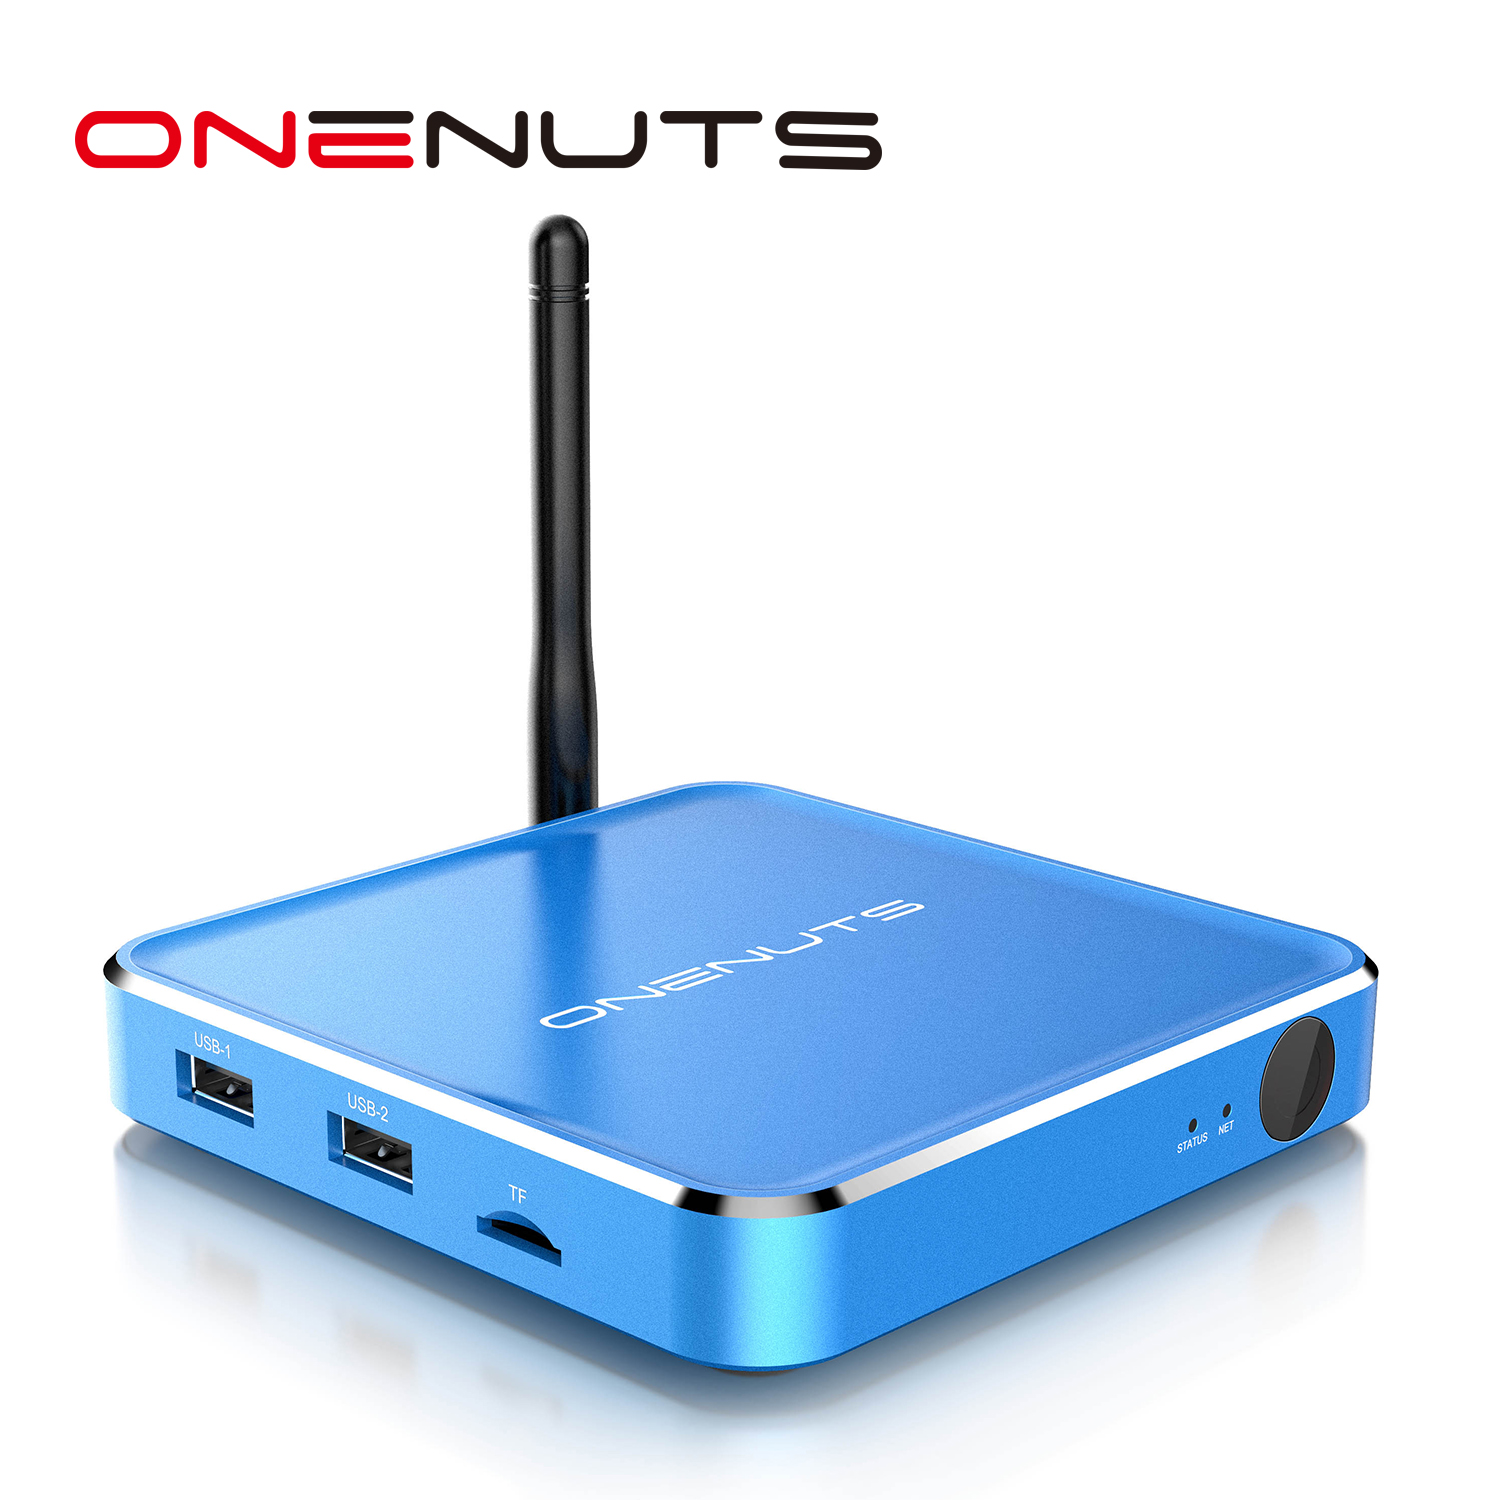 Miglior lettore Internet in streaming, nuovo TV Box Android con Android 6.0